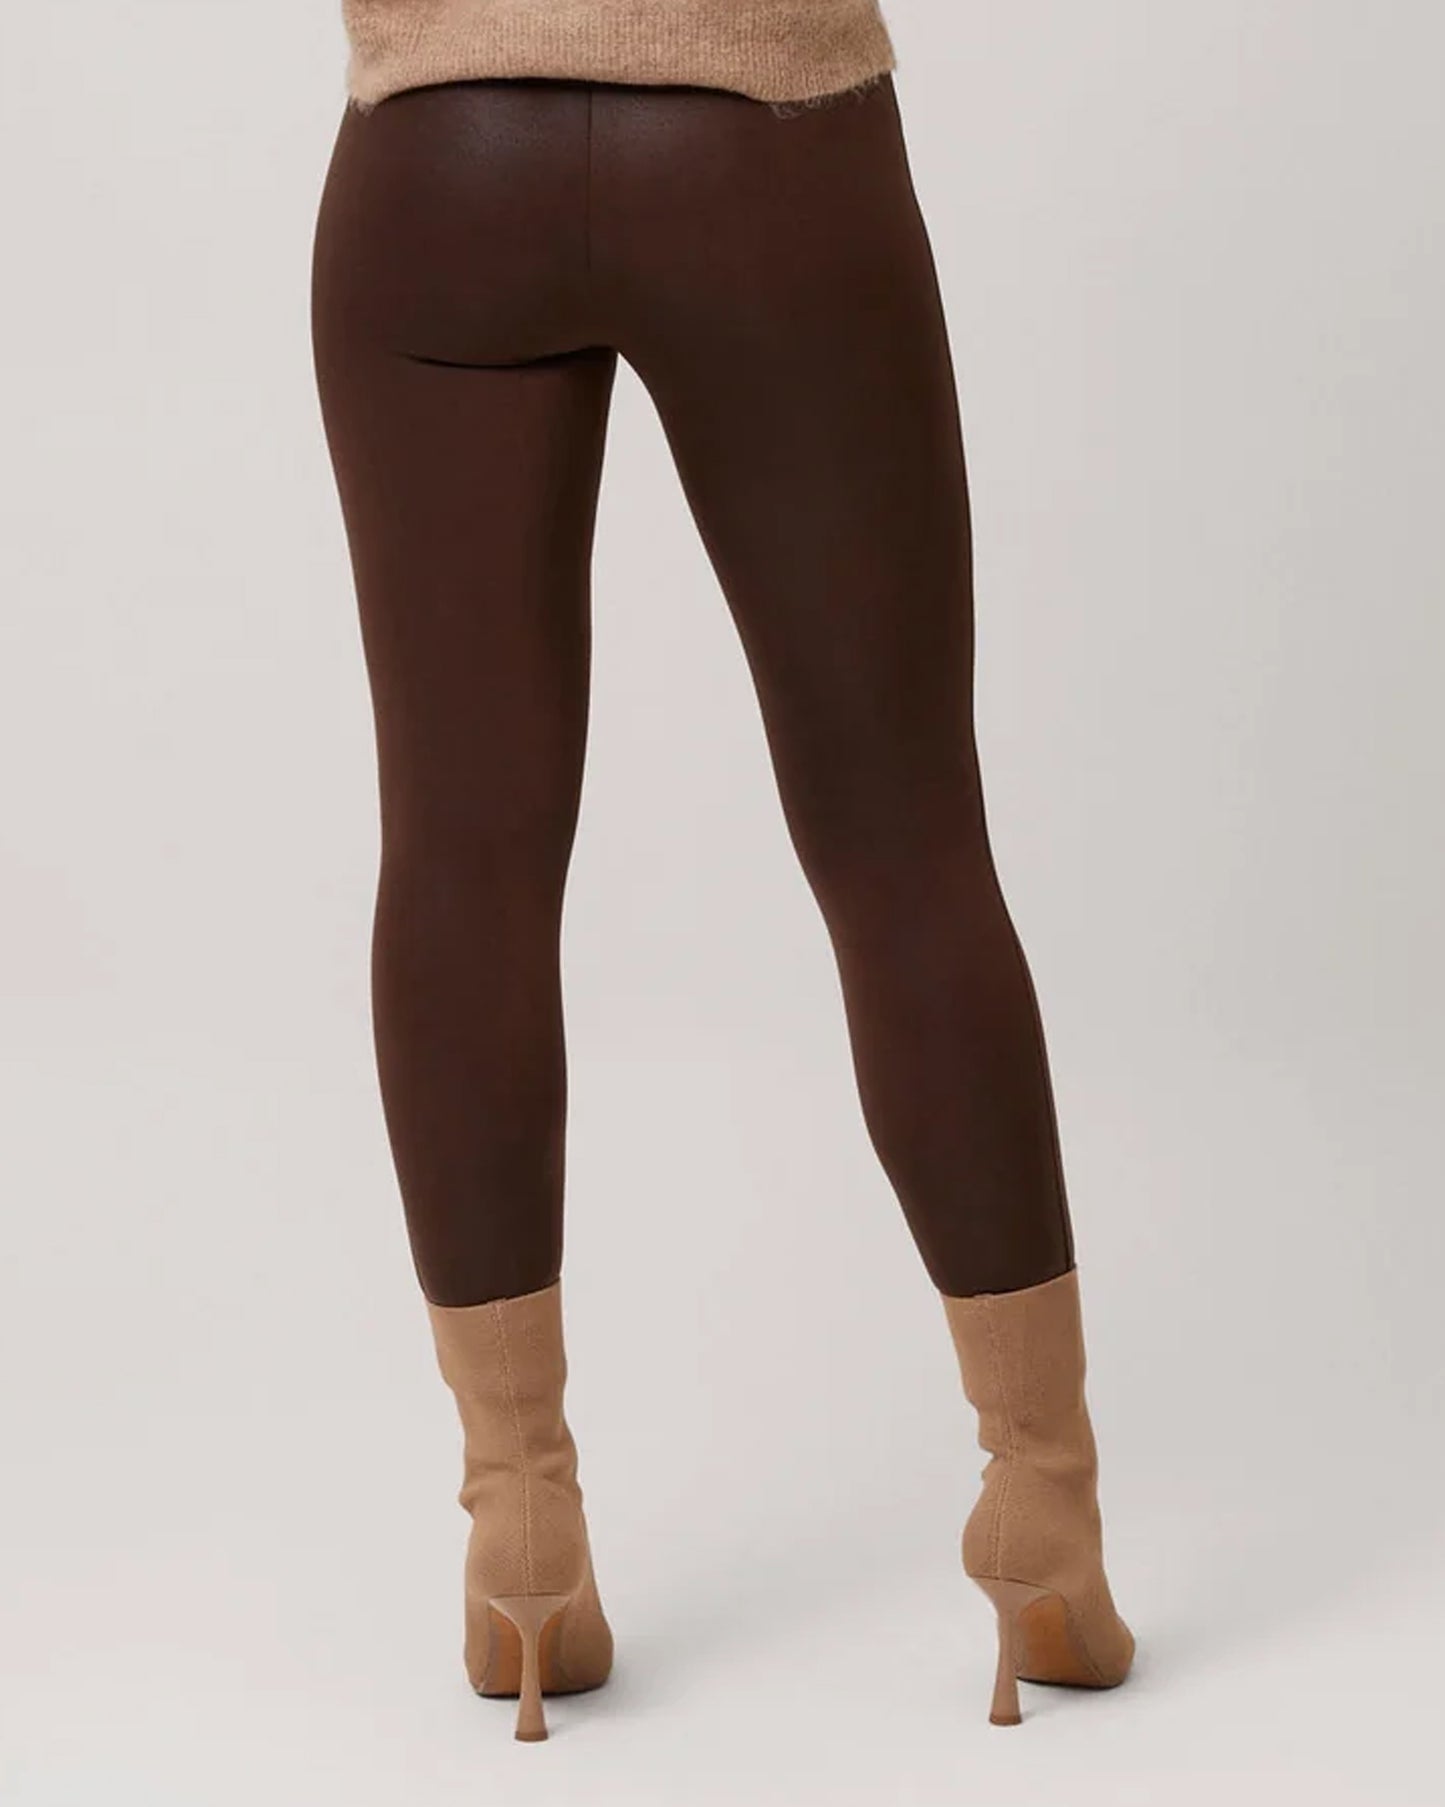 Ysabel Mora 70293 Waxed Thermal Leggings - Back view of chocolate brown high waisted thermal trouser leggings with waxed effect print and warm plush fleece lining.